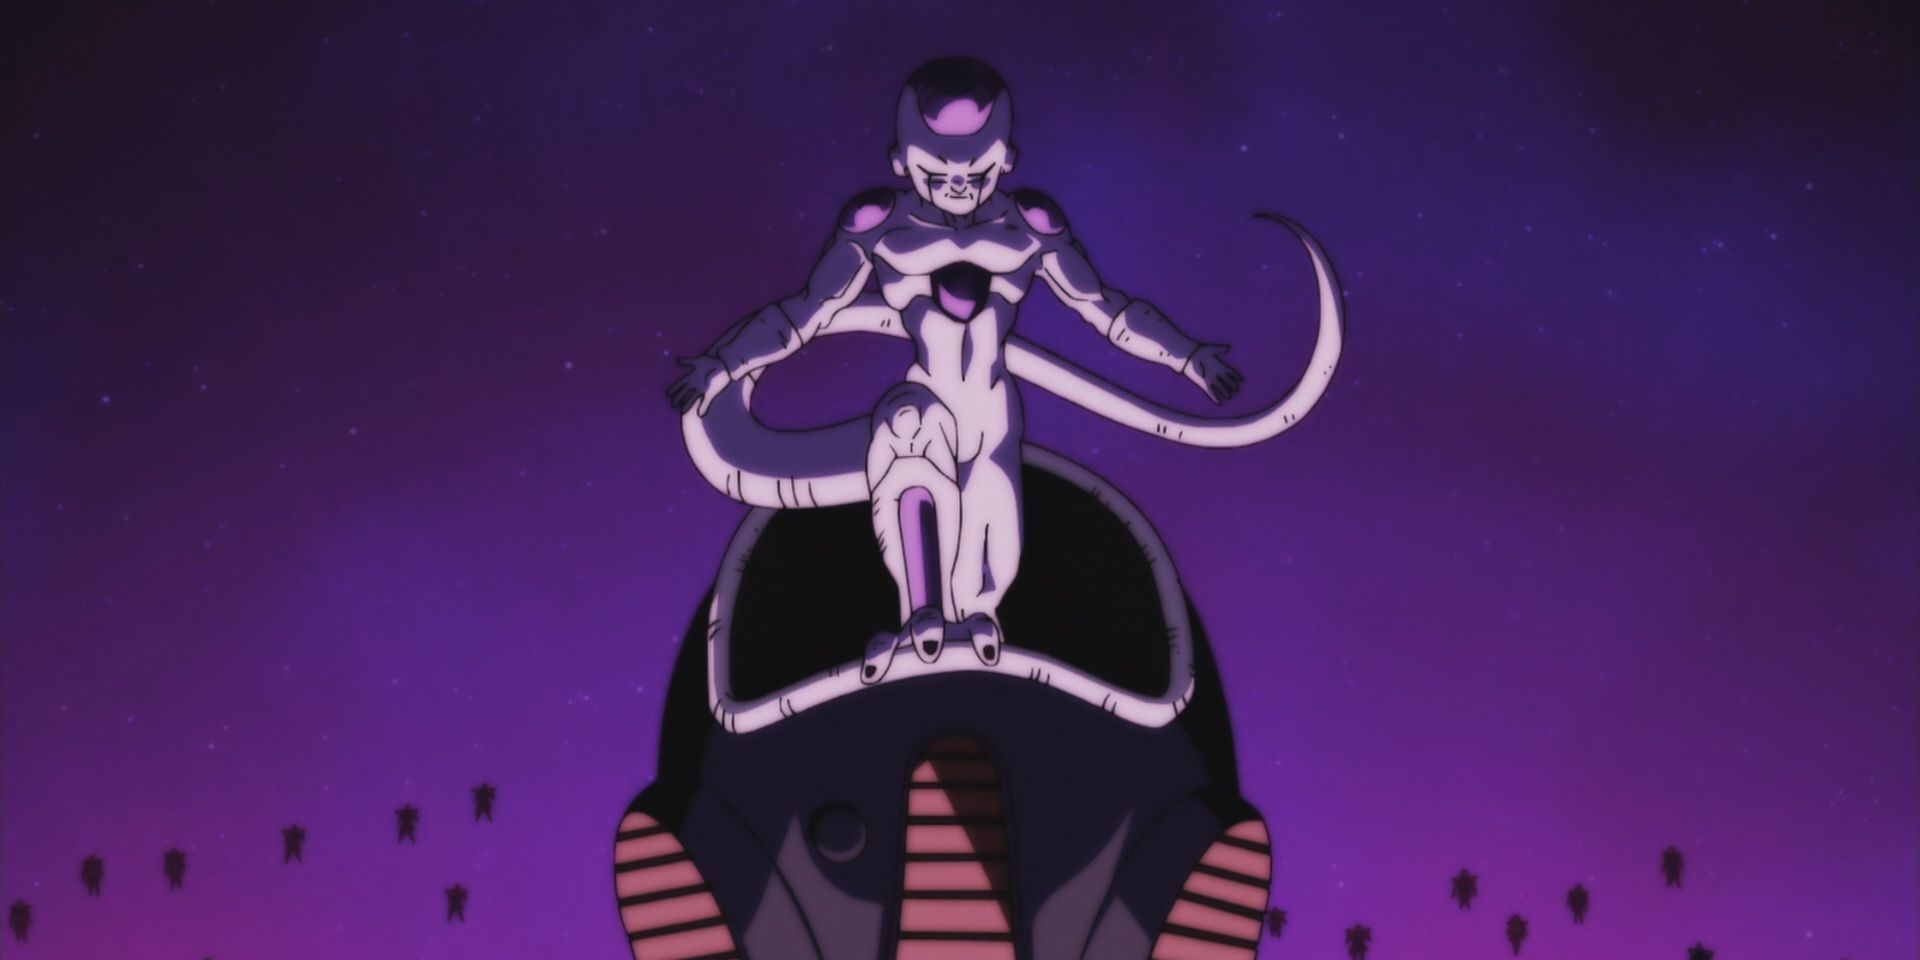 Frieza addresses his underlings in Dragon Ball Super